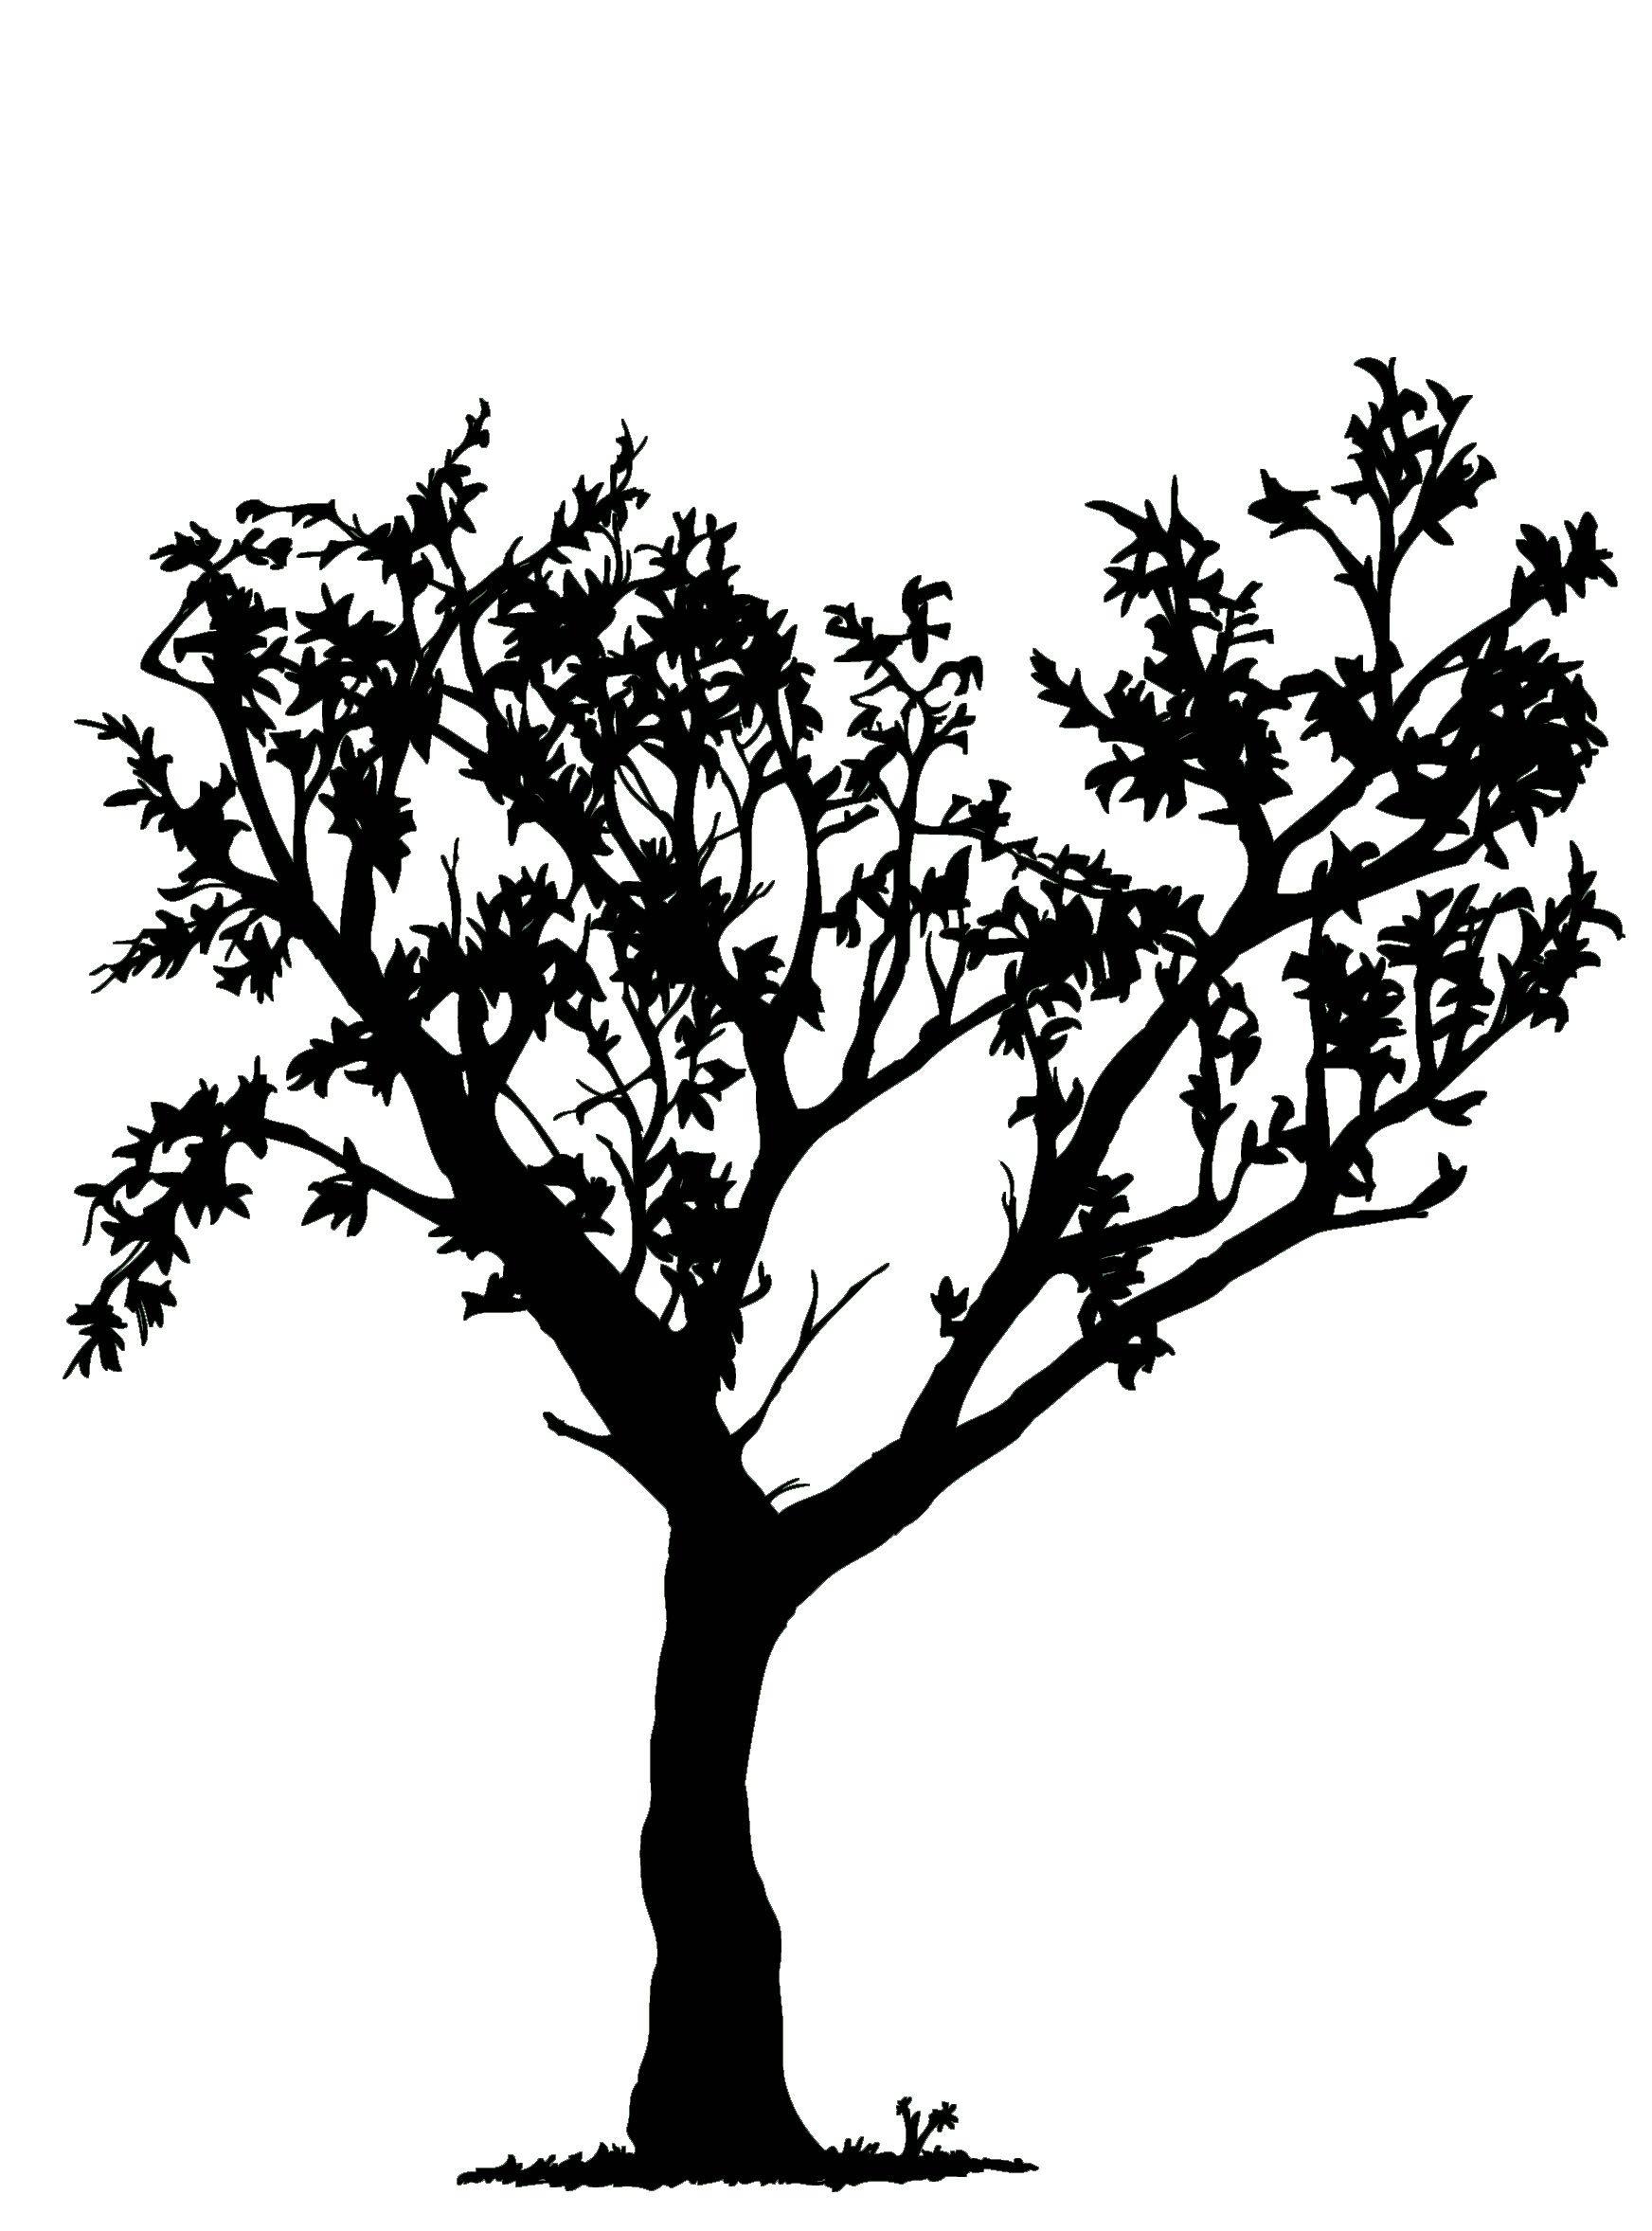 Black and White Tree with Roots Logo - Tree Drawings Black And White Gallery (60+ images)